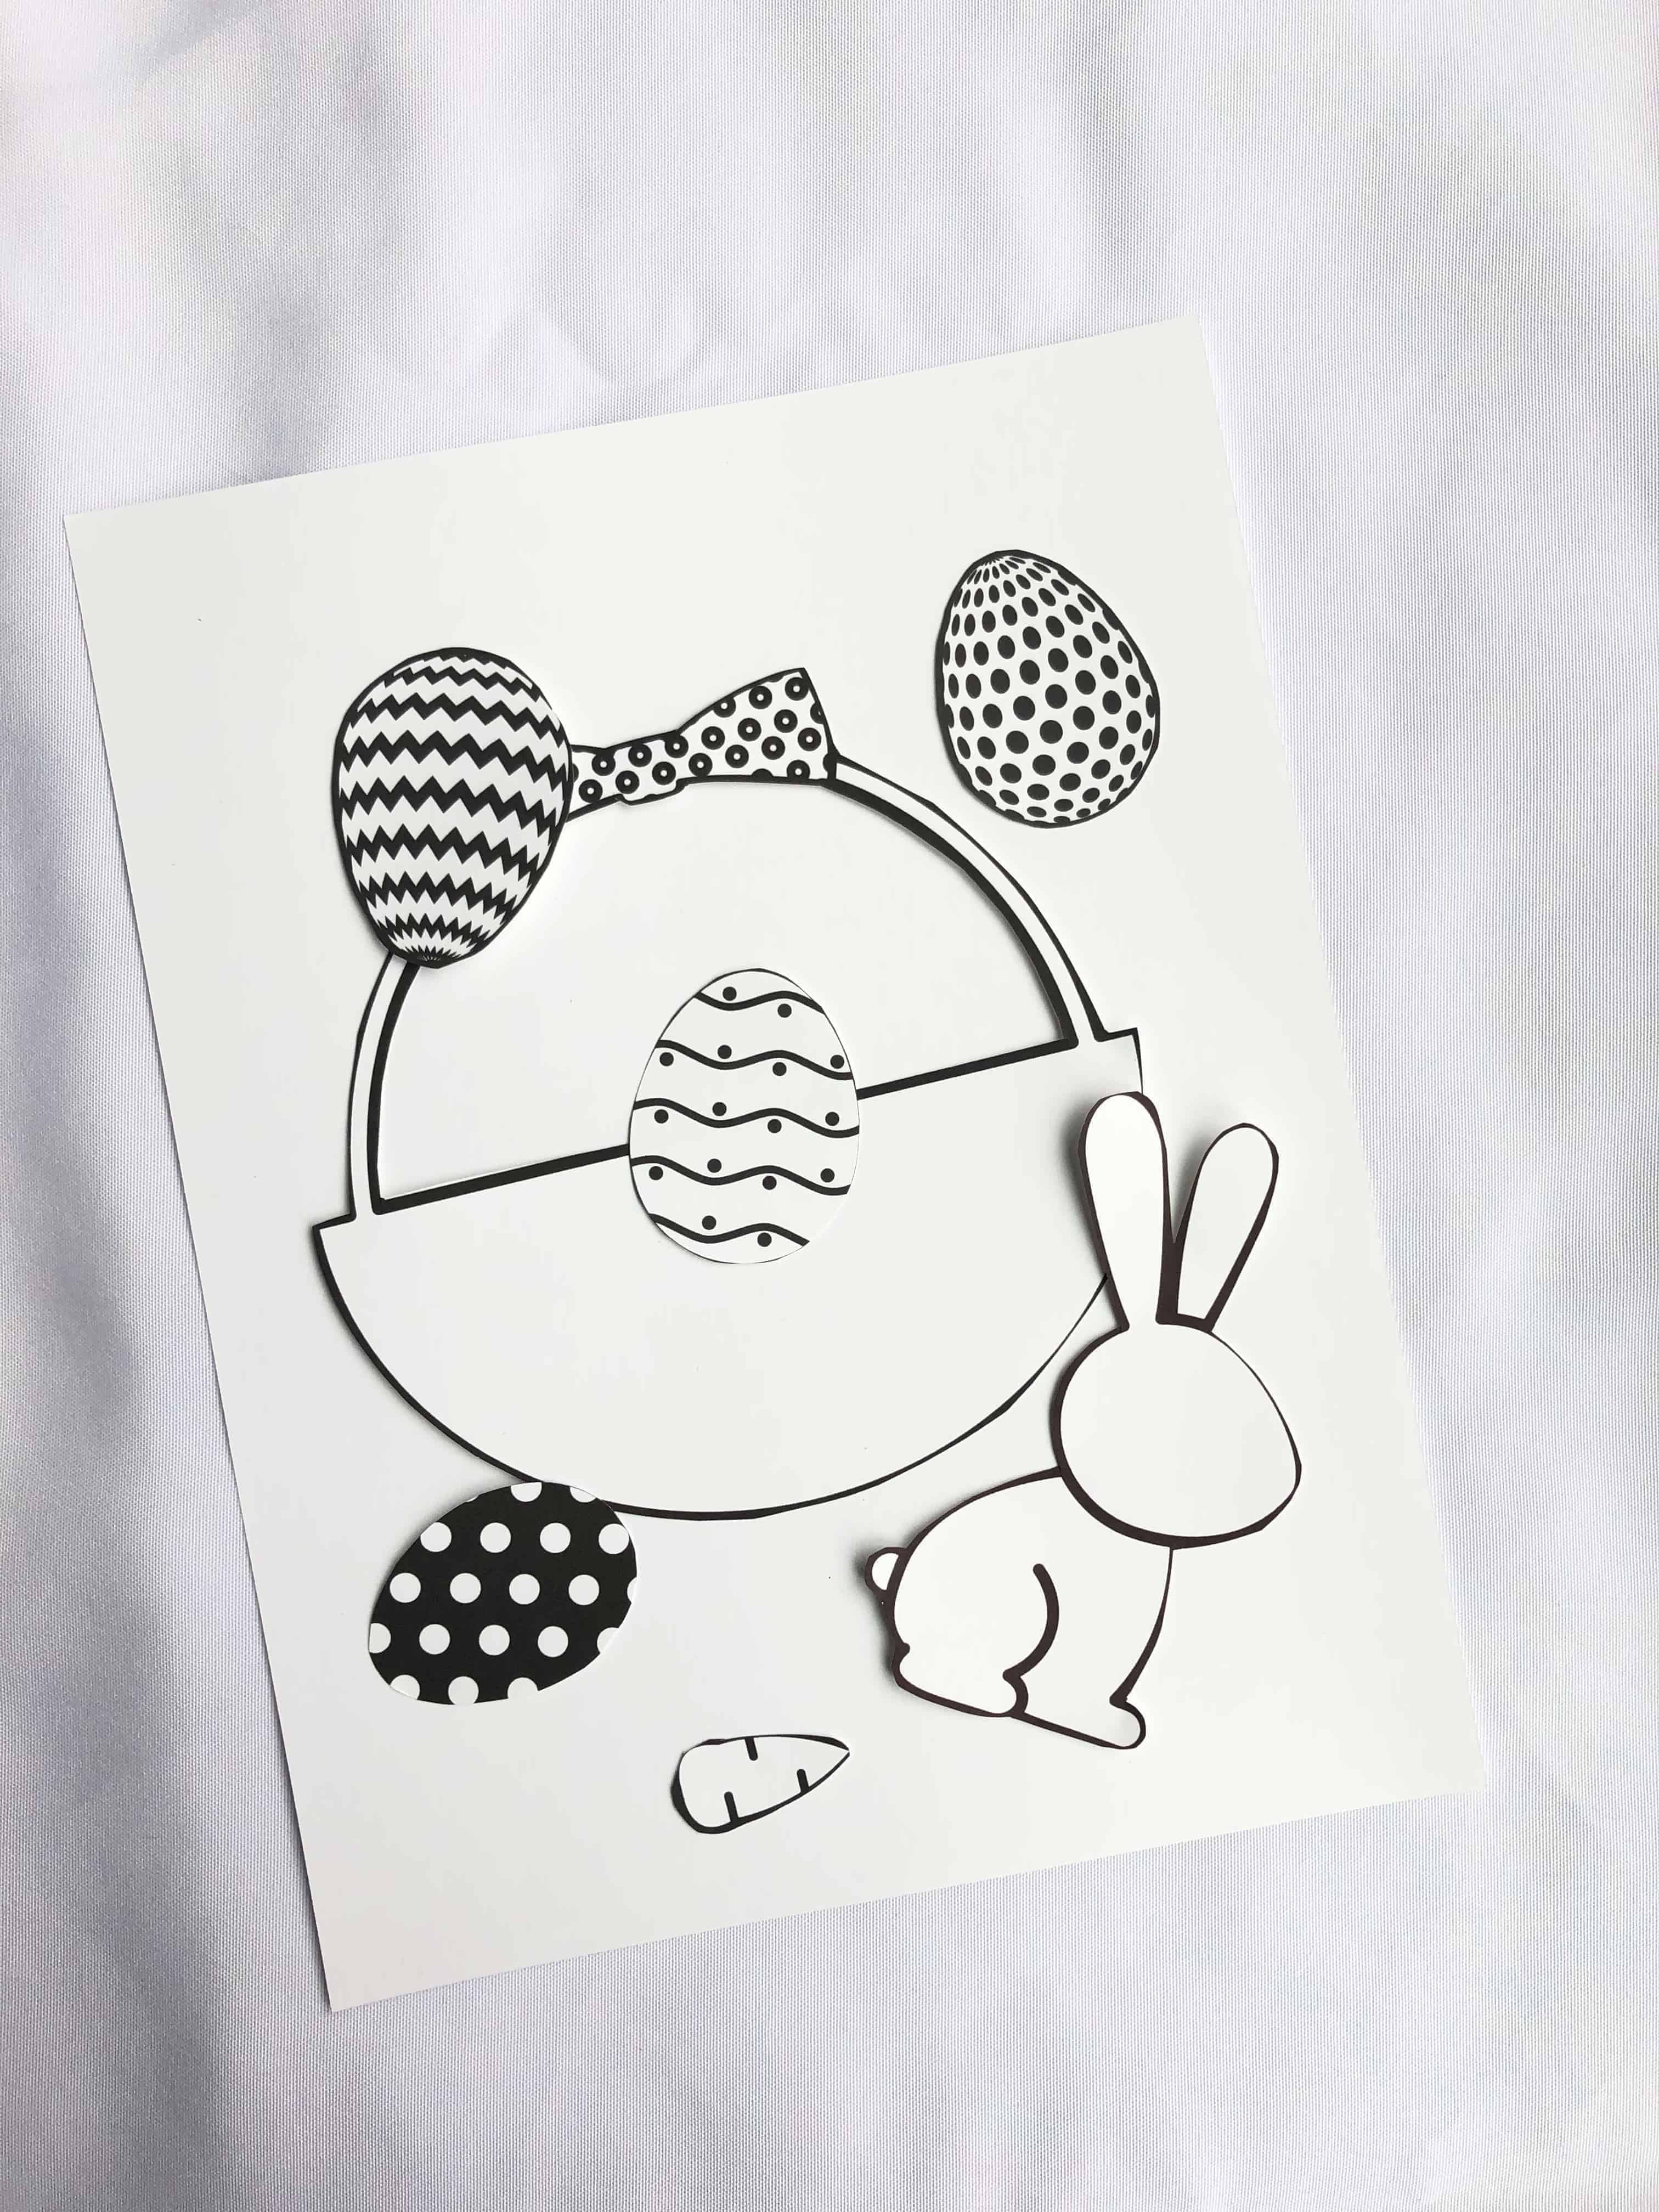 Free printable Easter craft for kids- simply print, cut and paste!